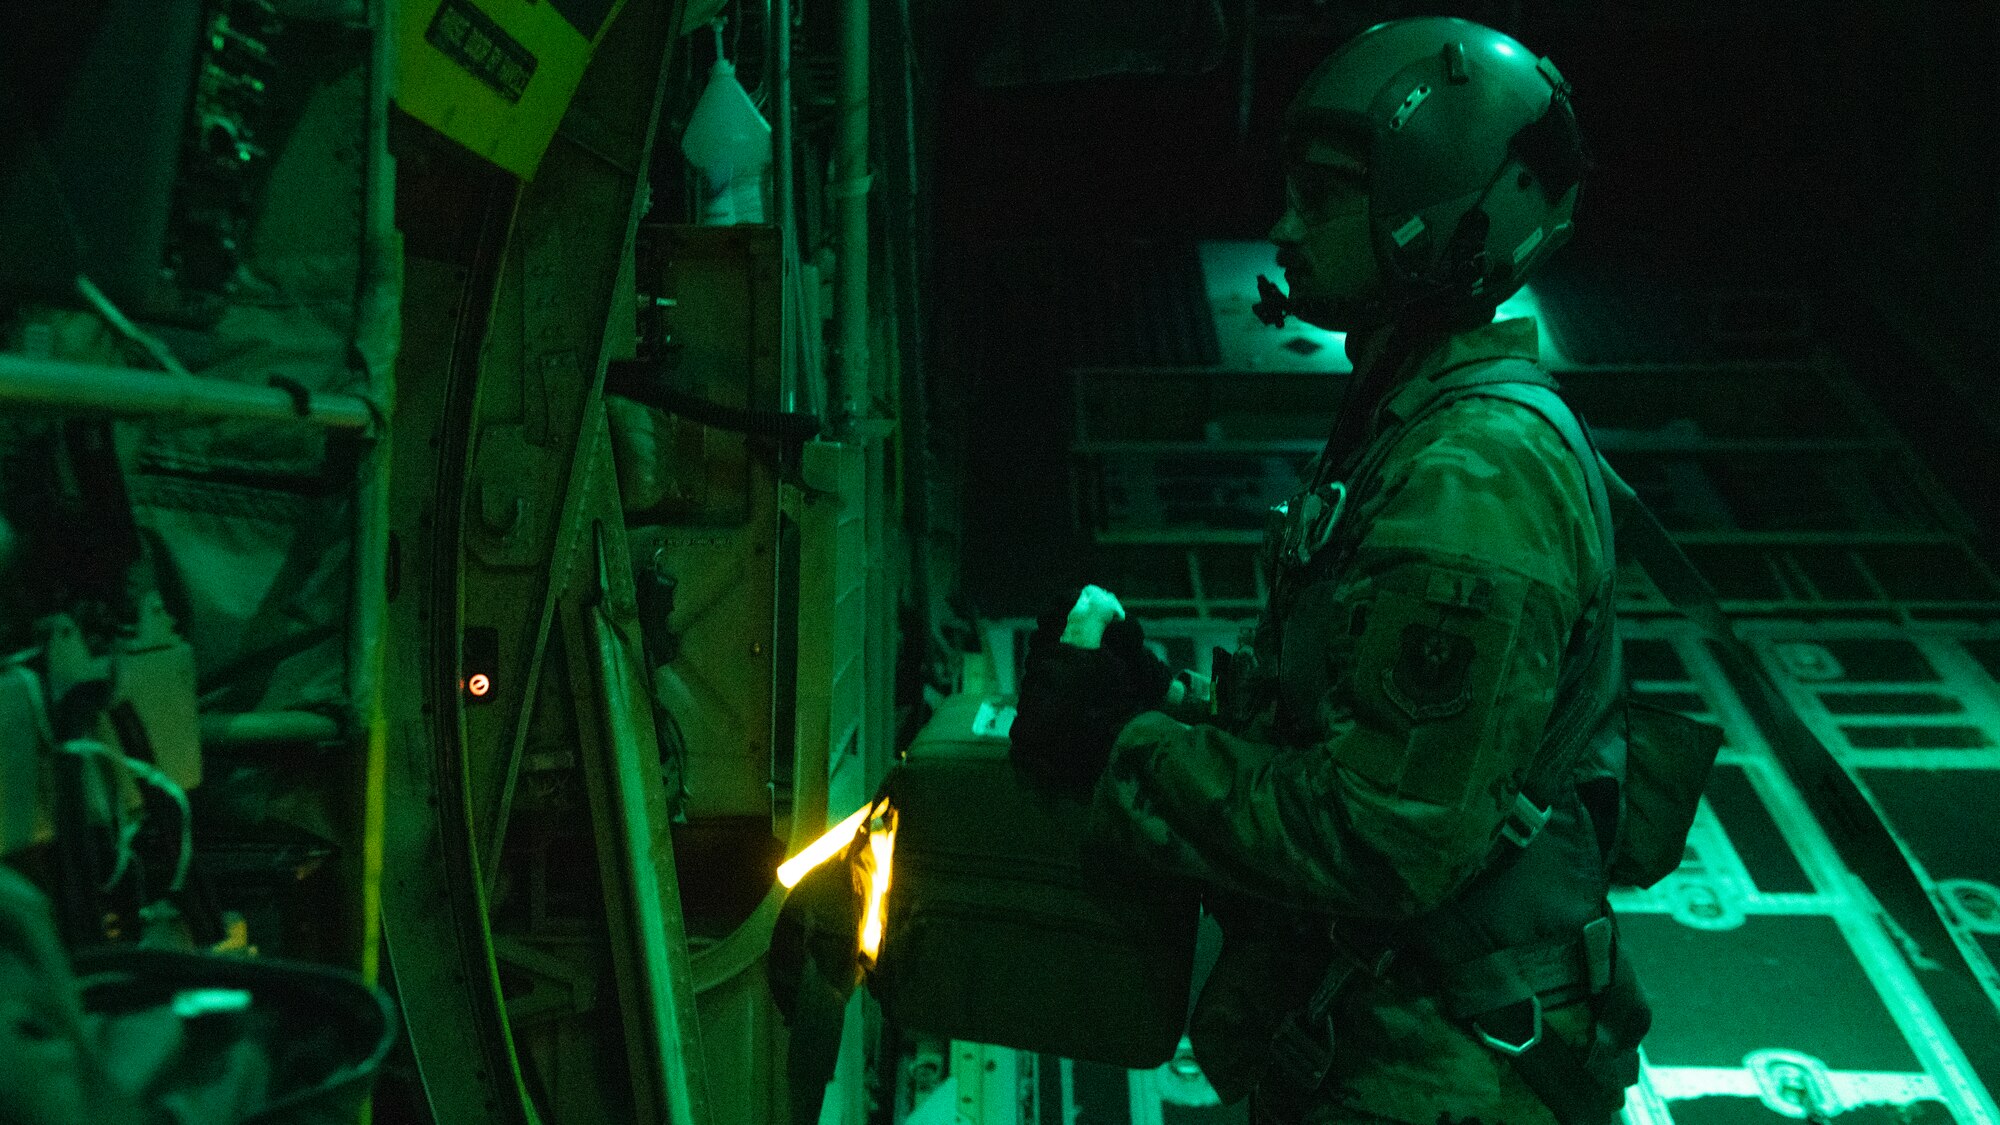 U.S. Air Force Tech. Sgt. John Richman, a 492nd Special Operations Training Group loadmaster, prepares to drop a thermal blood transport box during Operation Blood Rain near Eglin Range, Florida, Aug. 5, 2021.